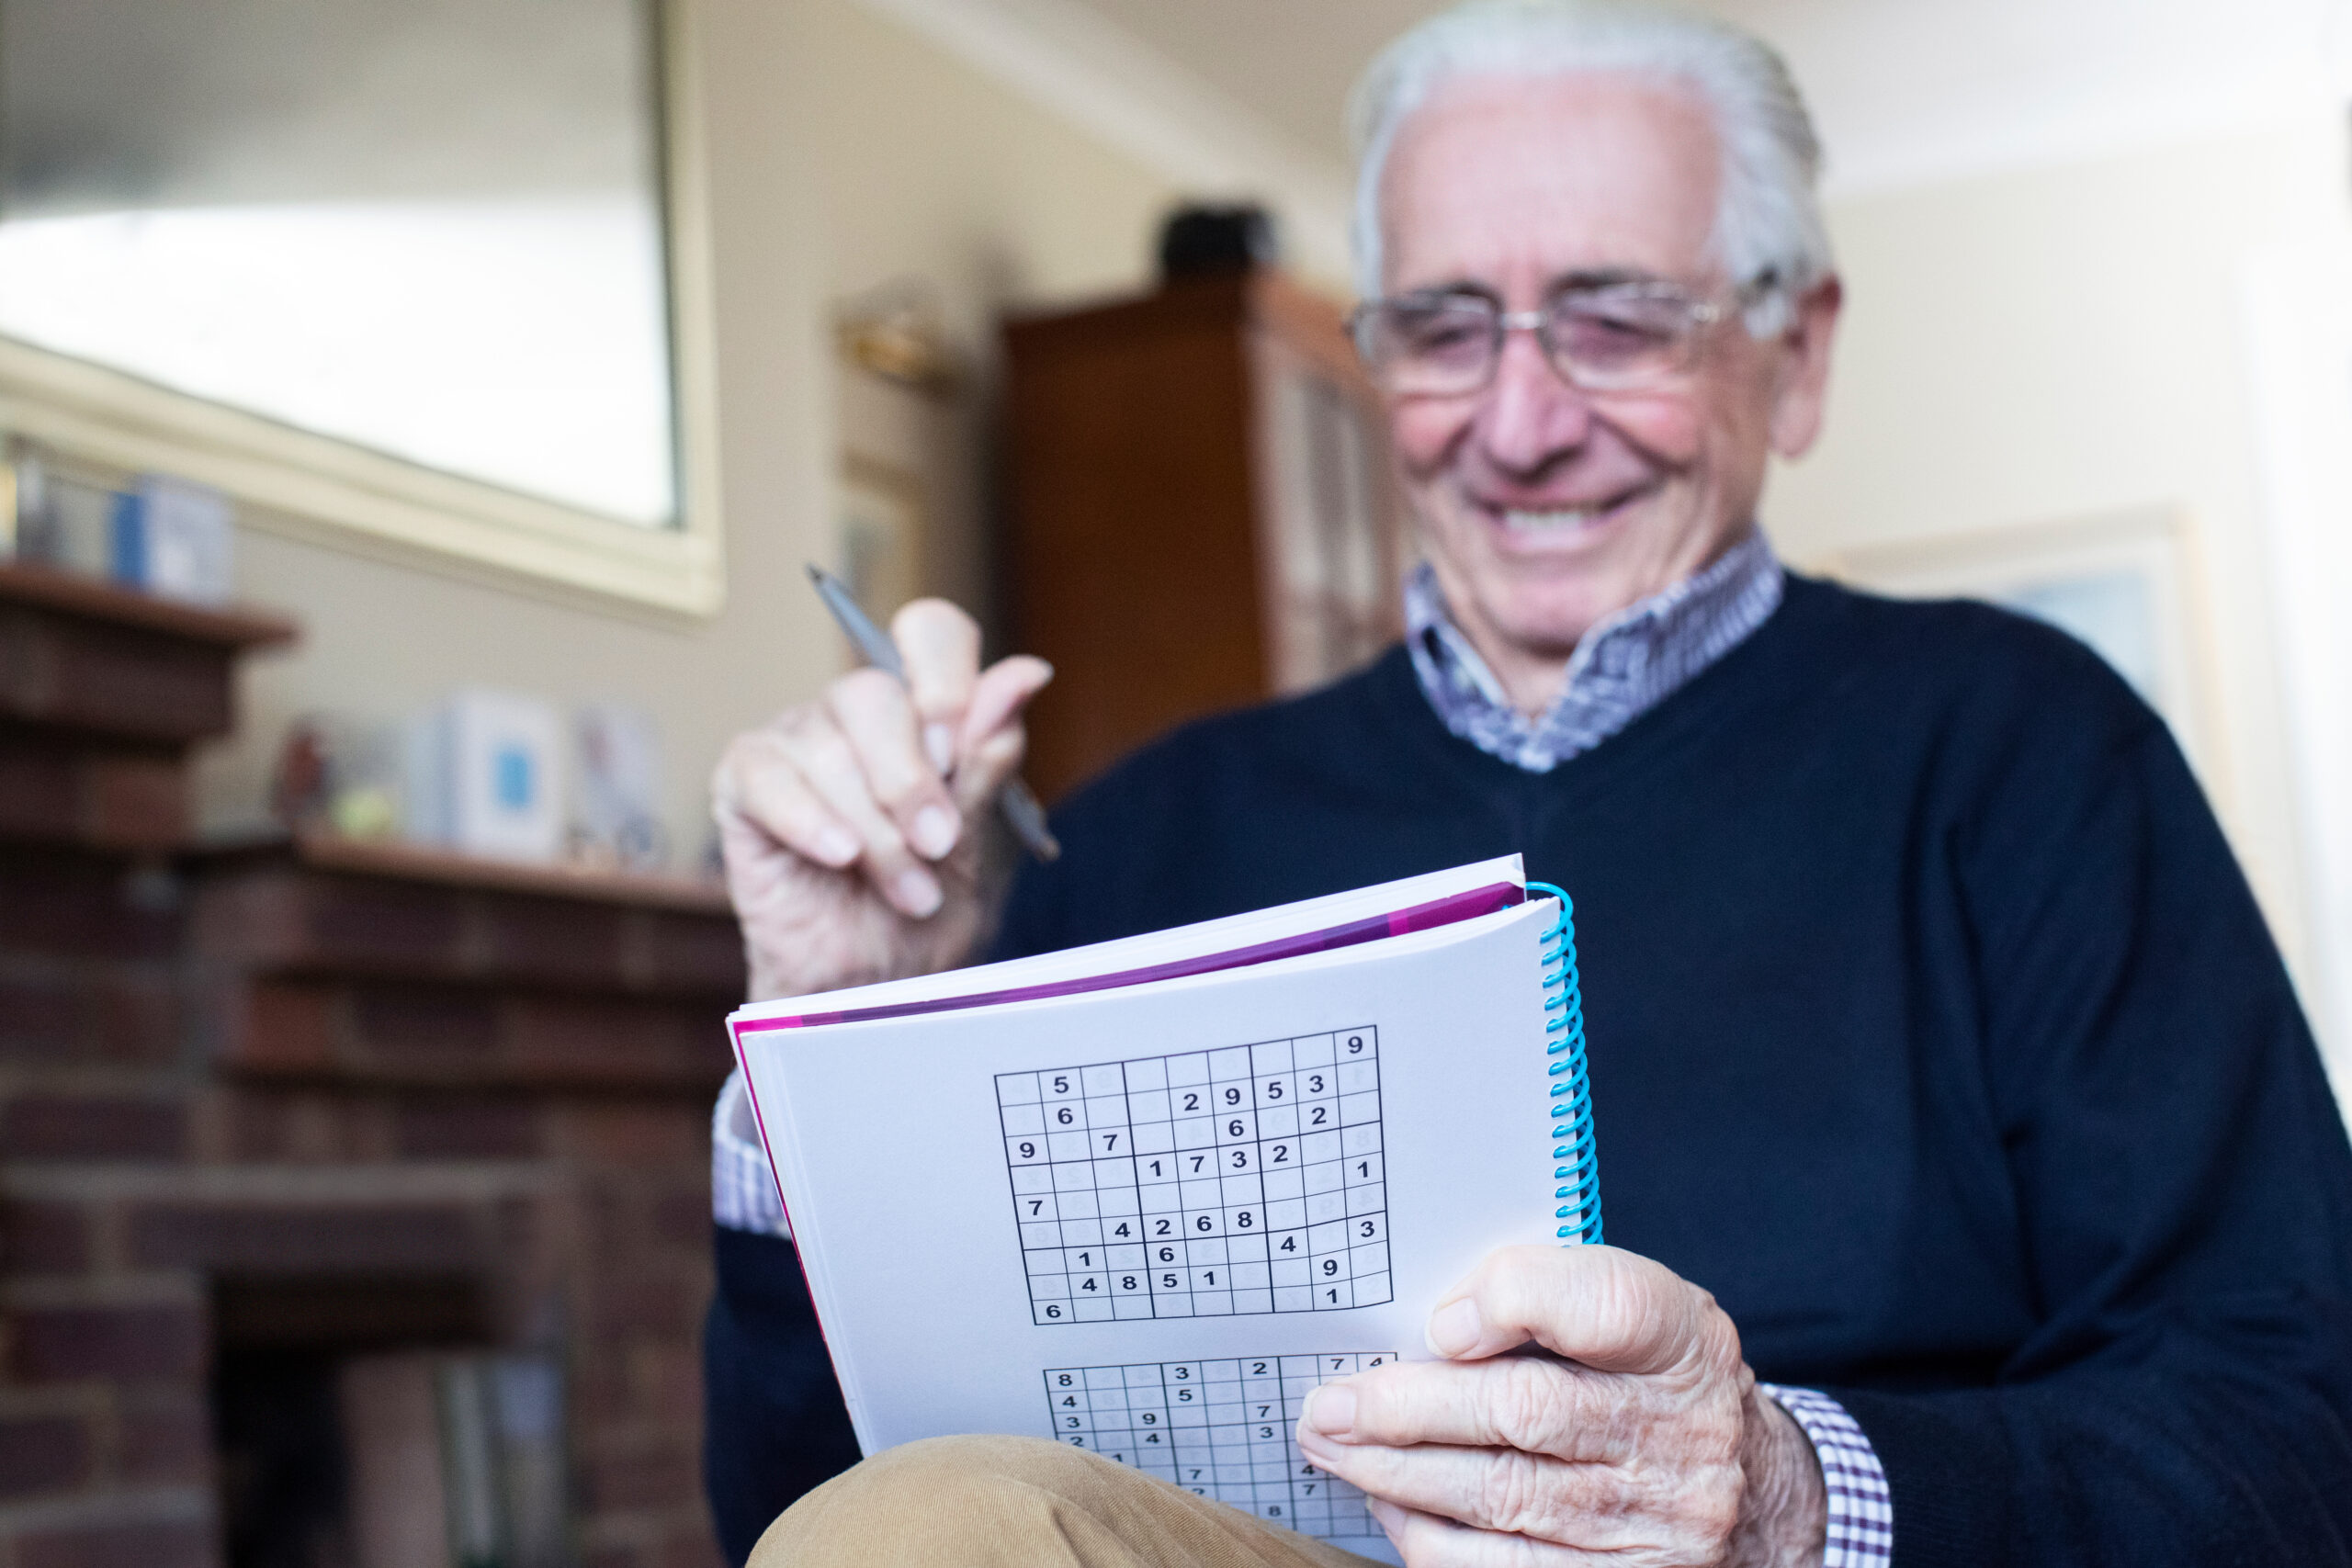 A man smiles as he works on a Sudoku puzzle.